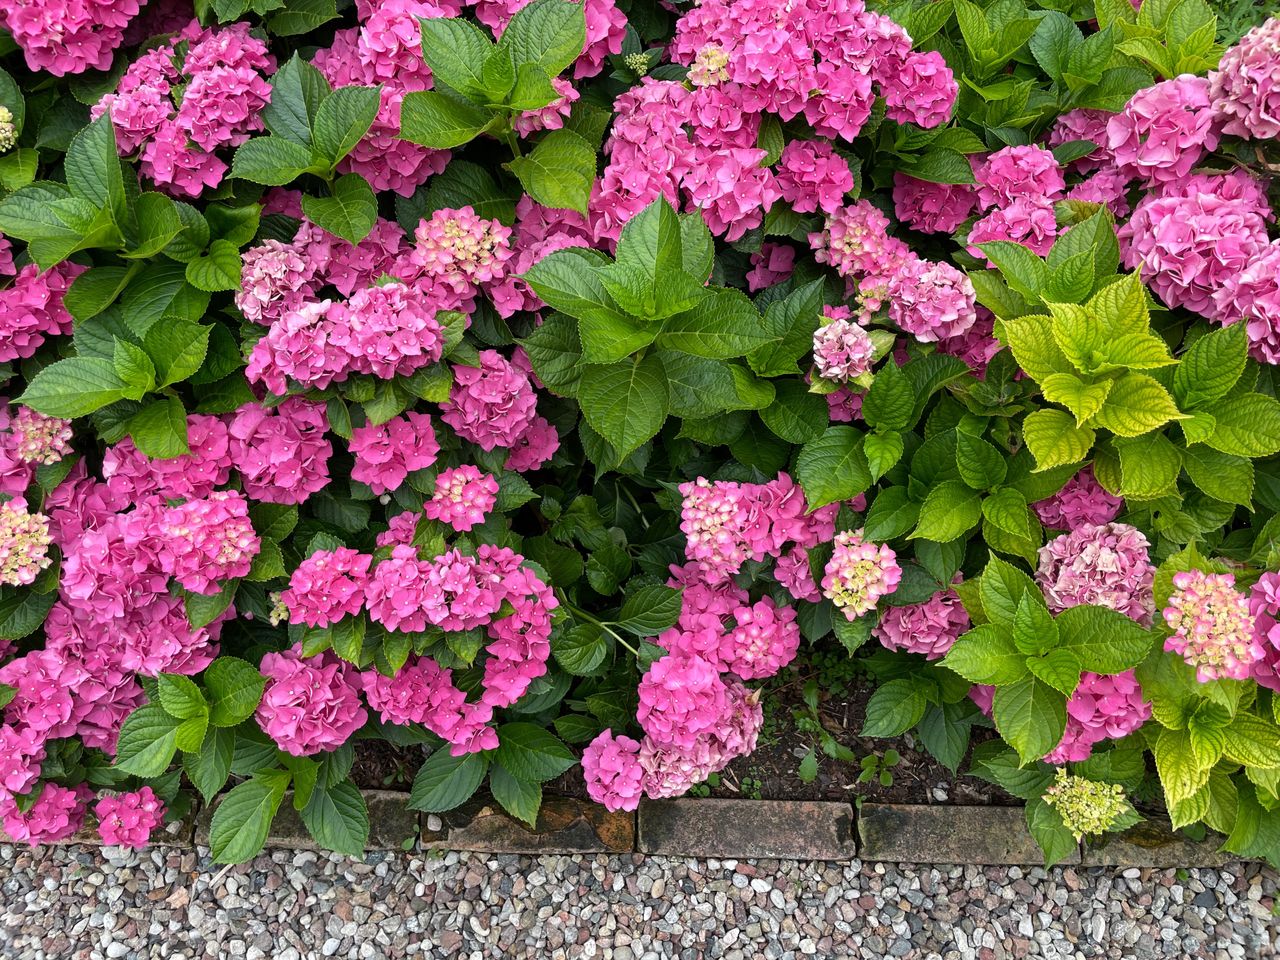 Optimal times and tips for watering hydrangeas effectively